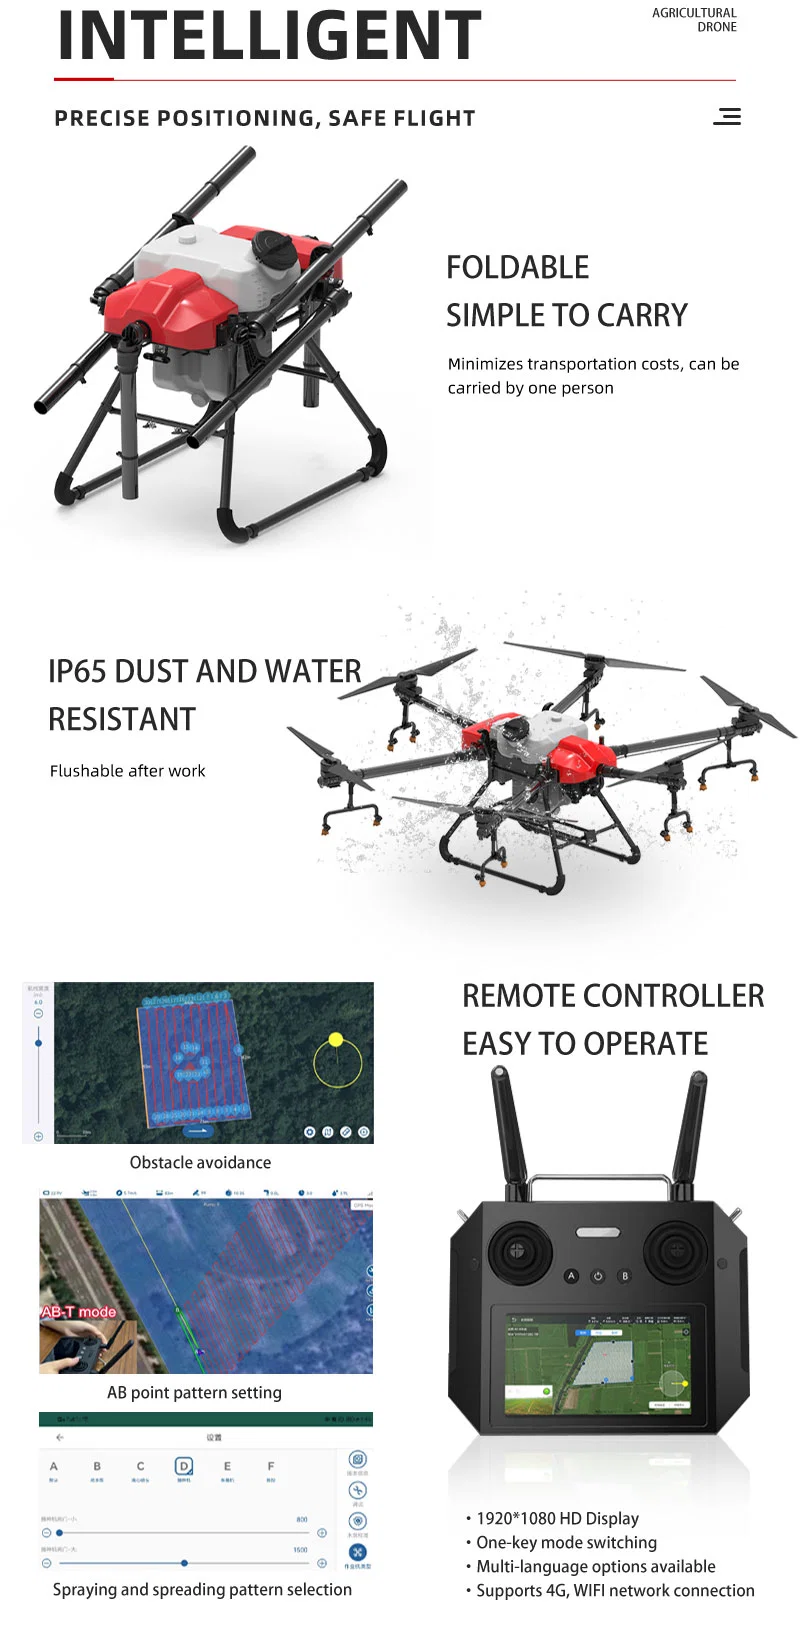 Set Agriculture Drone Business Plan 30 Liters 40 Kg Heavy Payload Farm Pesticides 6 Axis Fixed Wing Agriculture Crop Spraying Drone Price with Remote Control